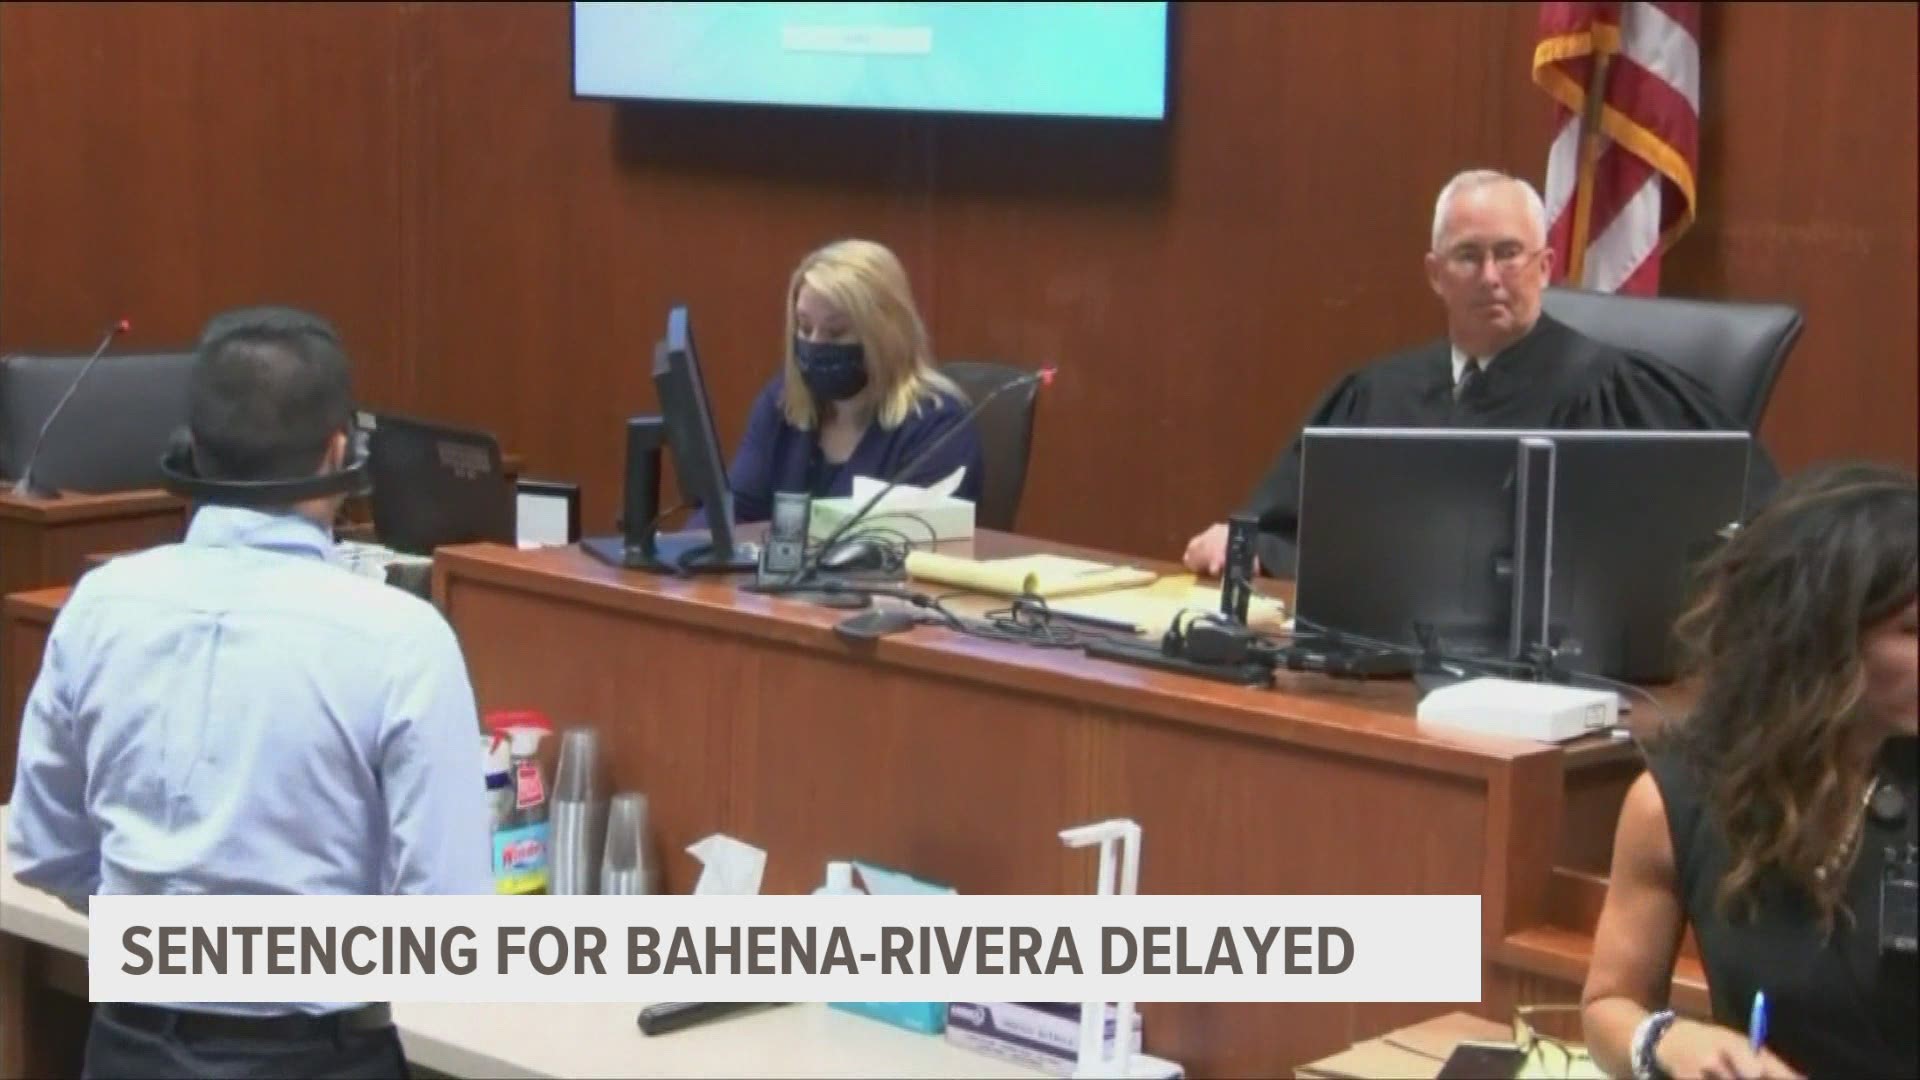 Bahena Rivera was convicted May 28 of murdering 20-year-old University of Iowa student Mollie Tibbetts.